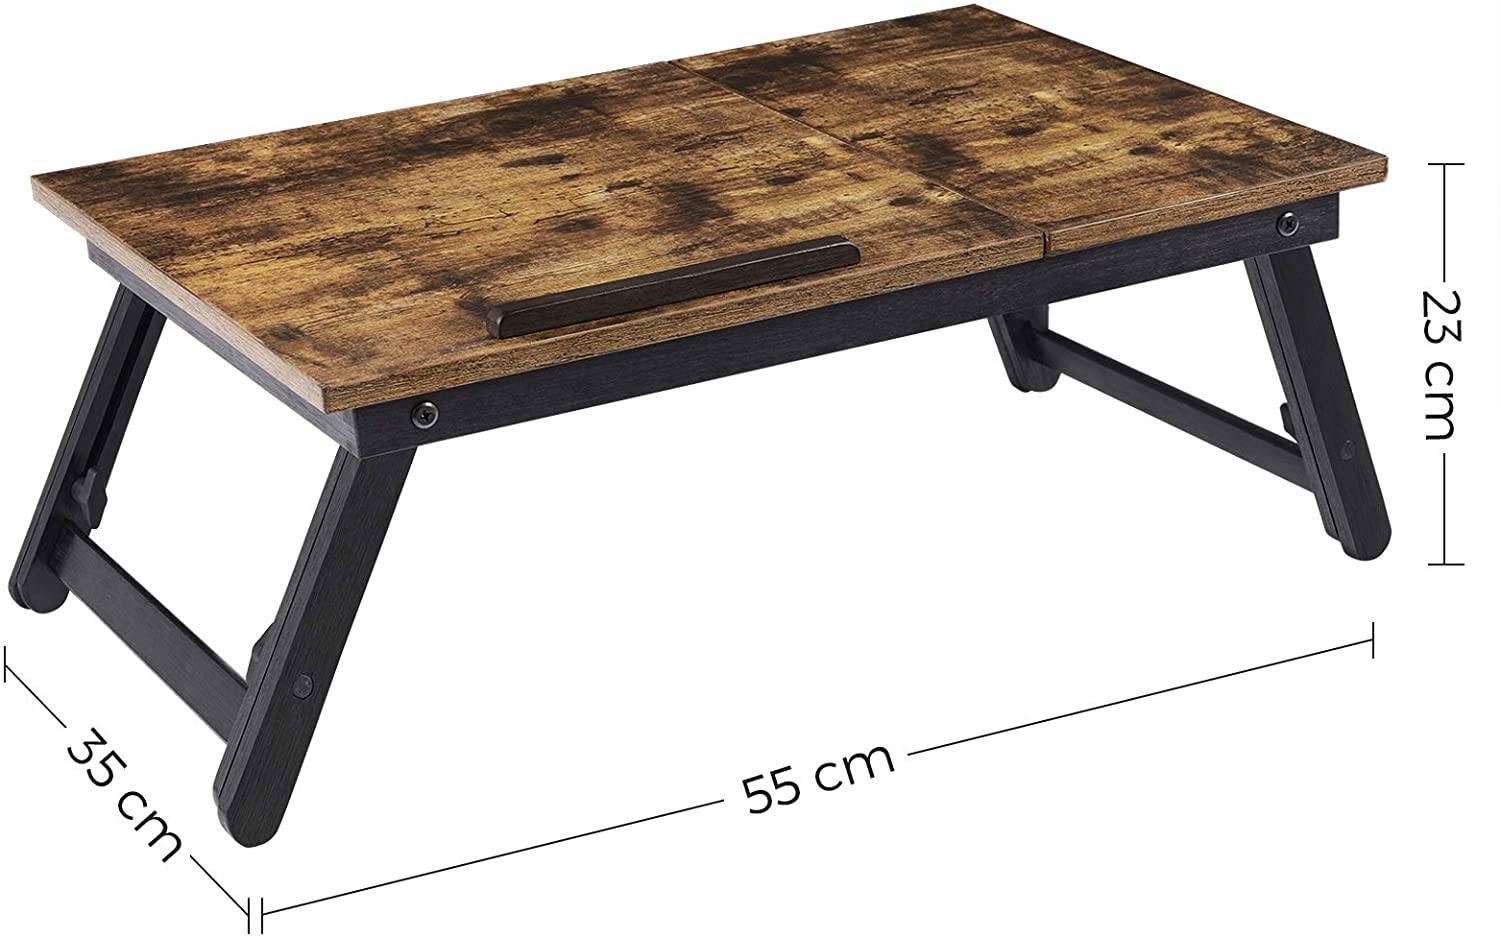 Laptop Desk for Bed or Sofa RAW58.dk